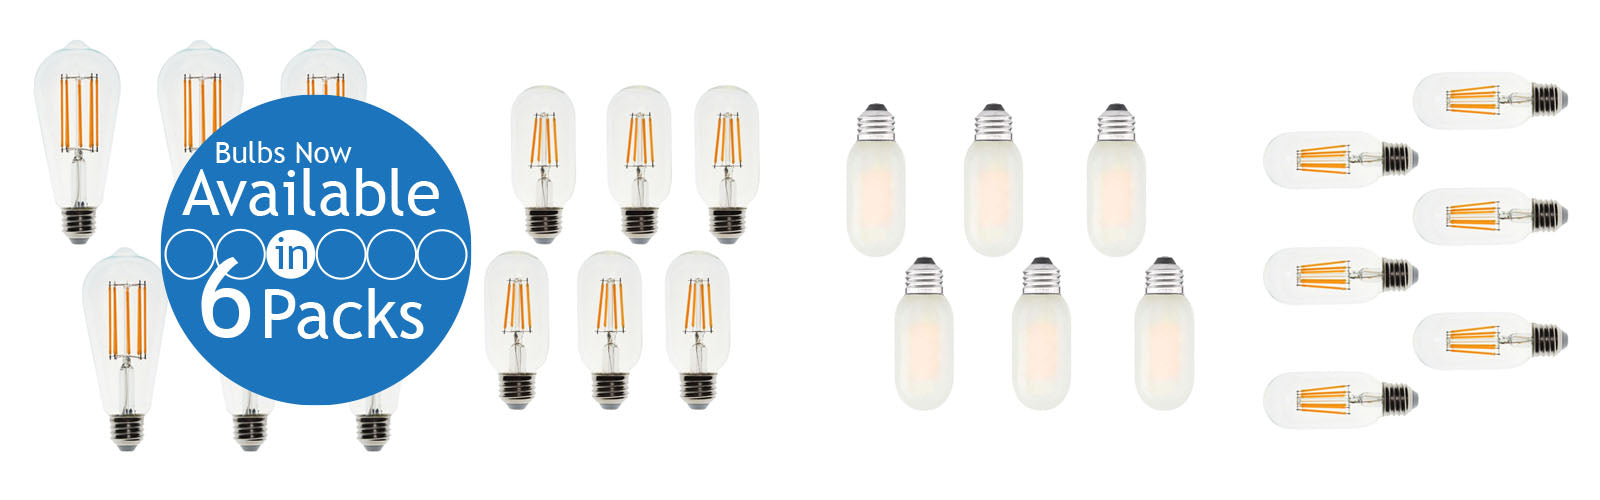 Bulbs now available in 6 packs